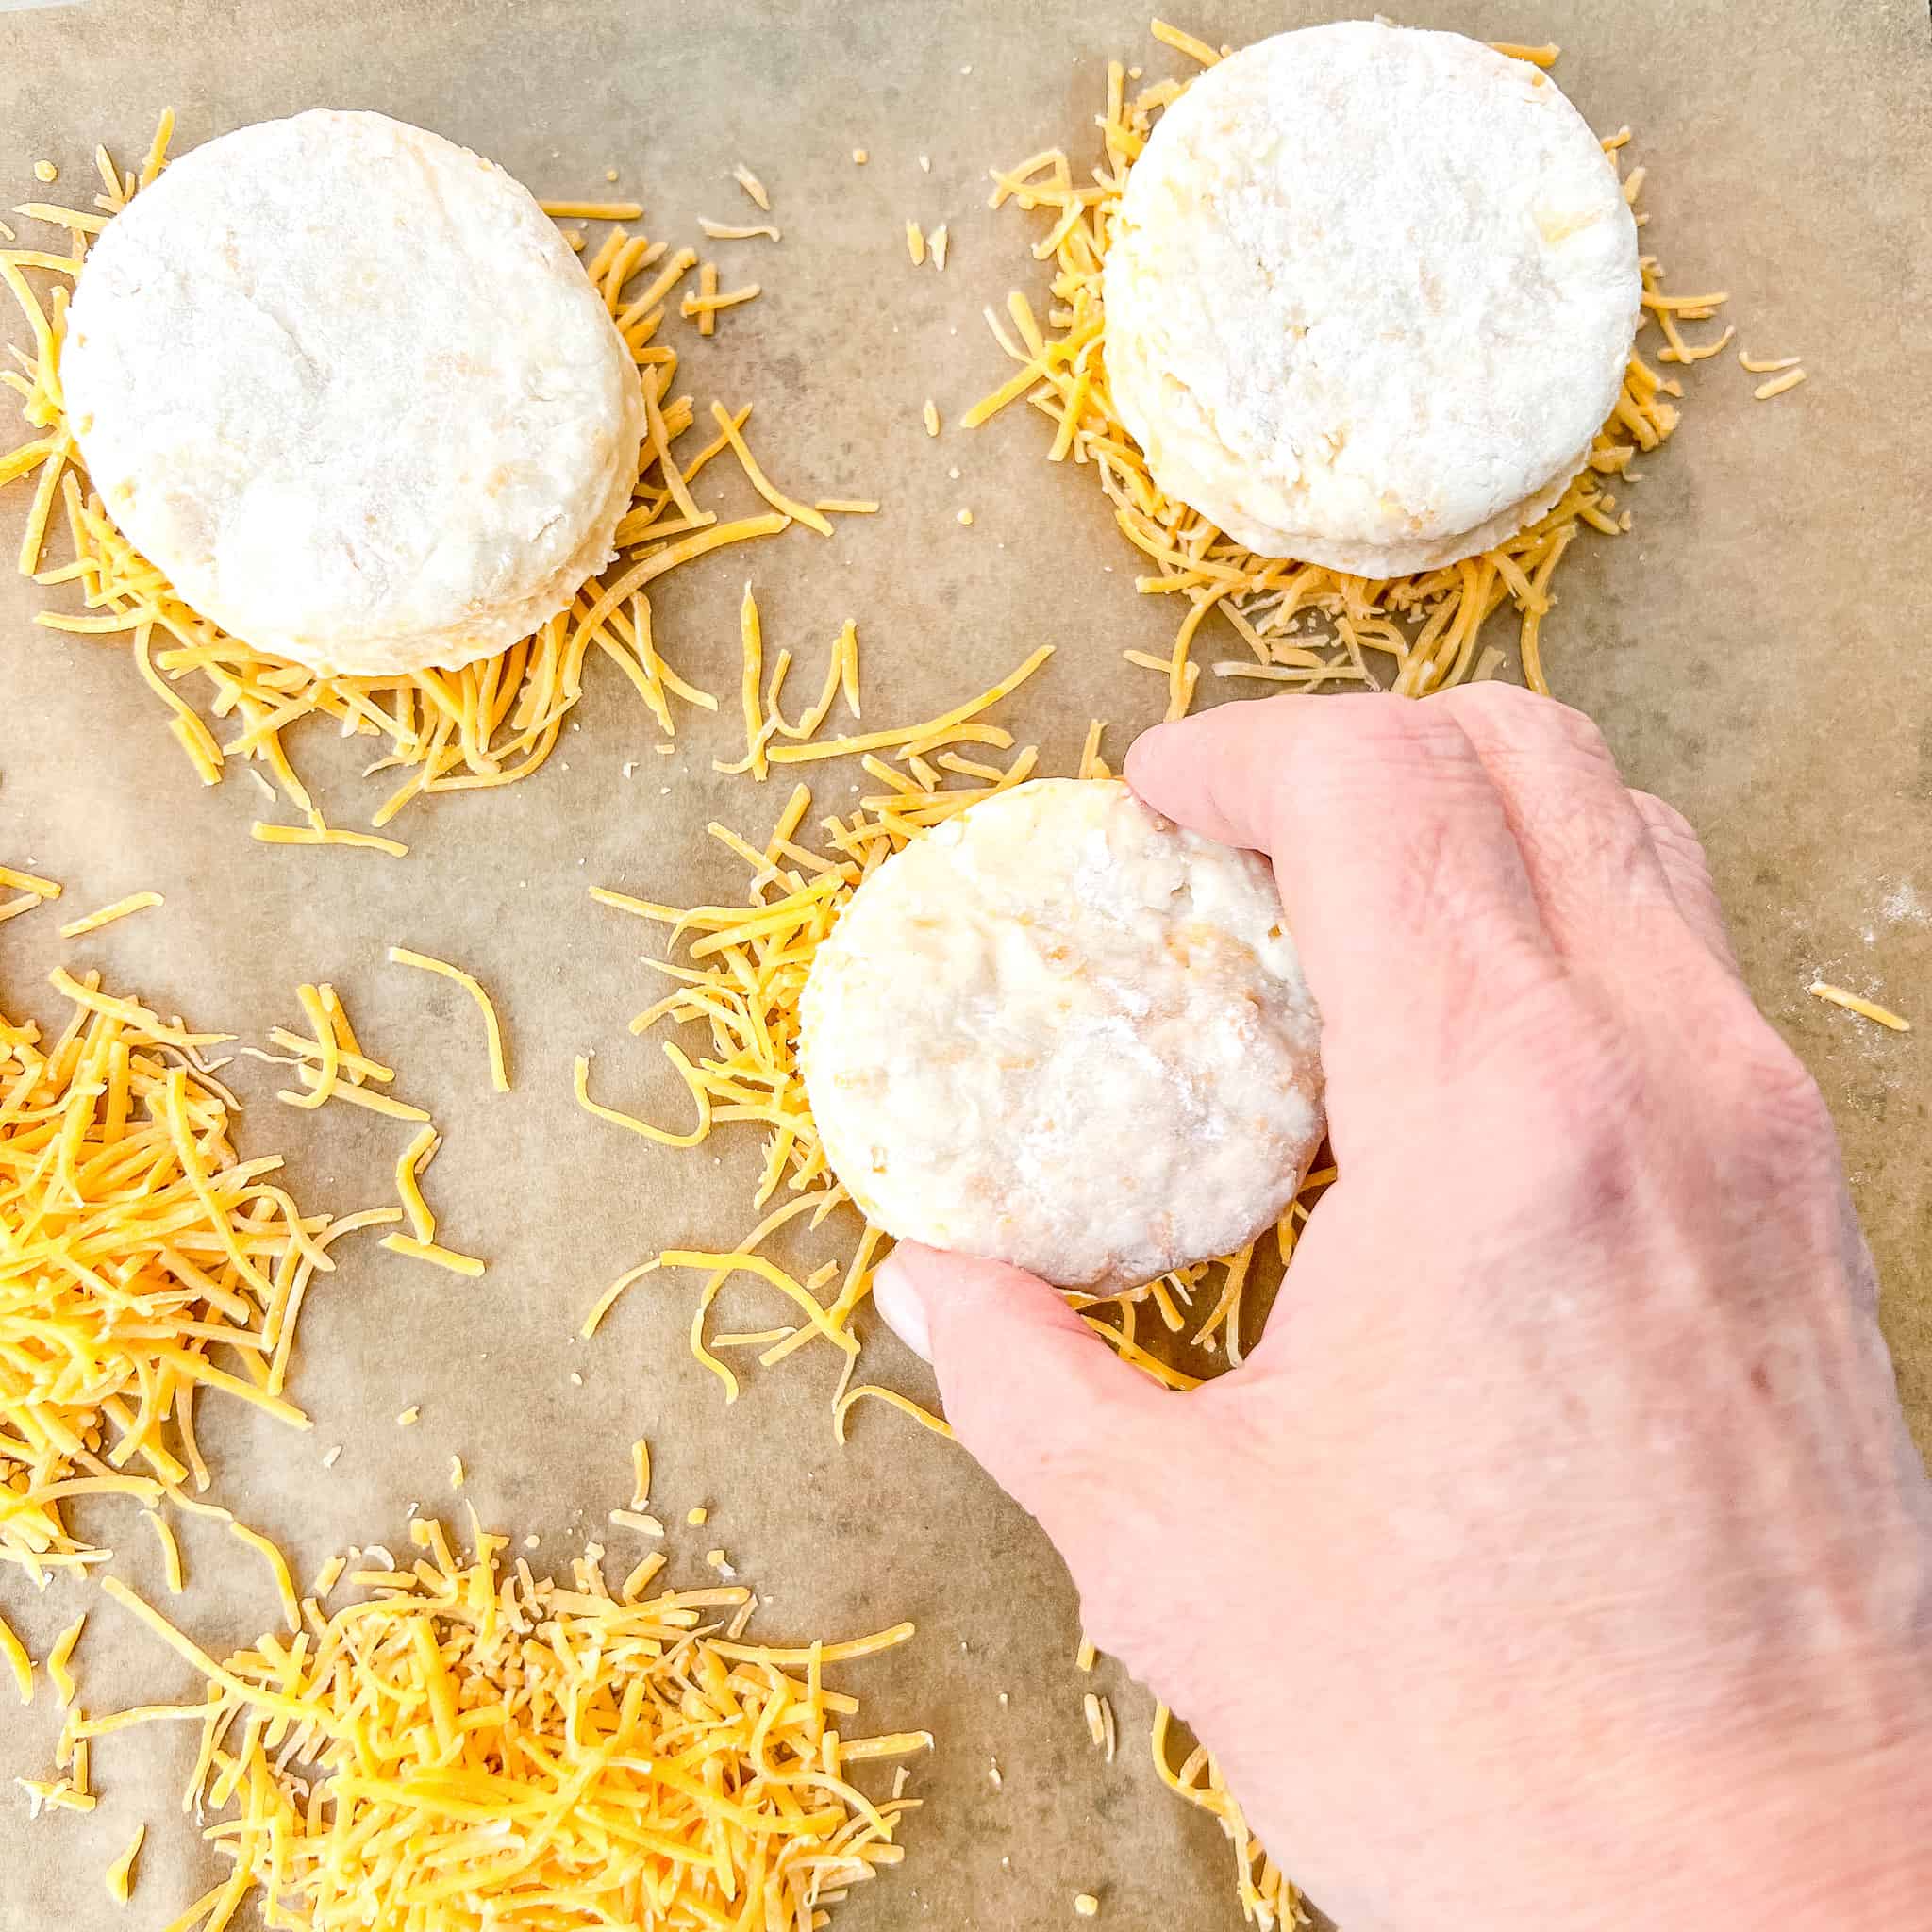 Placing biscuit on a pile of cheddar.